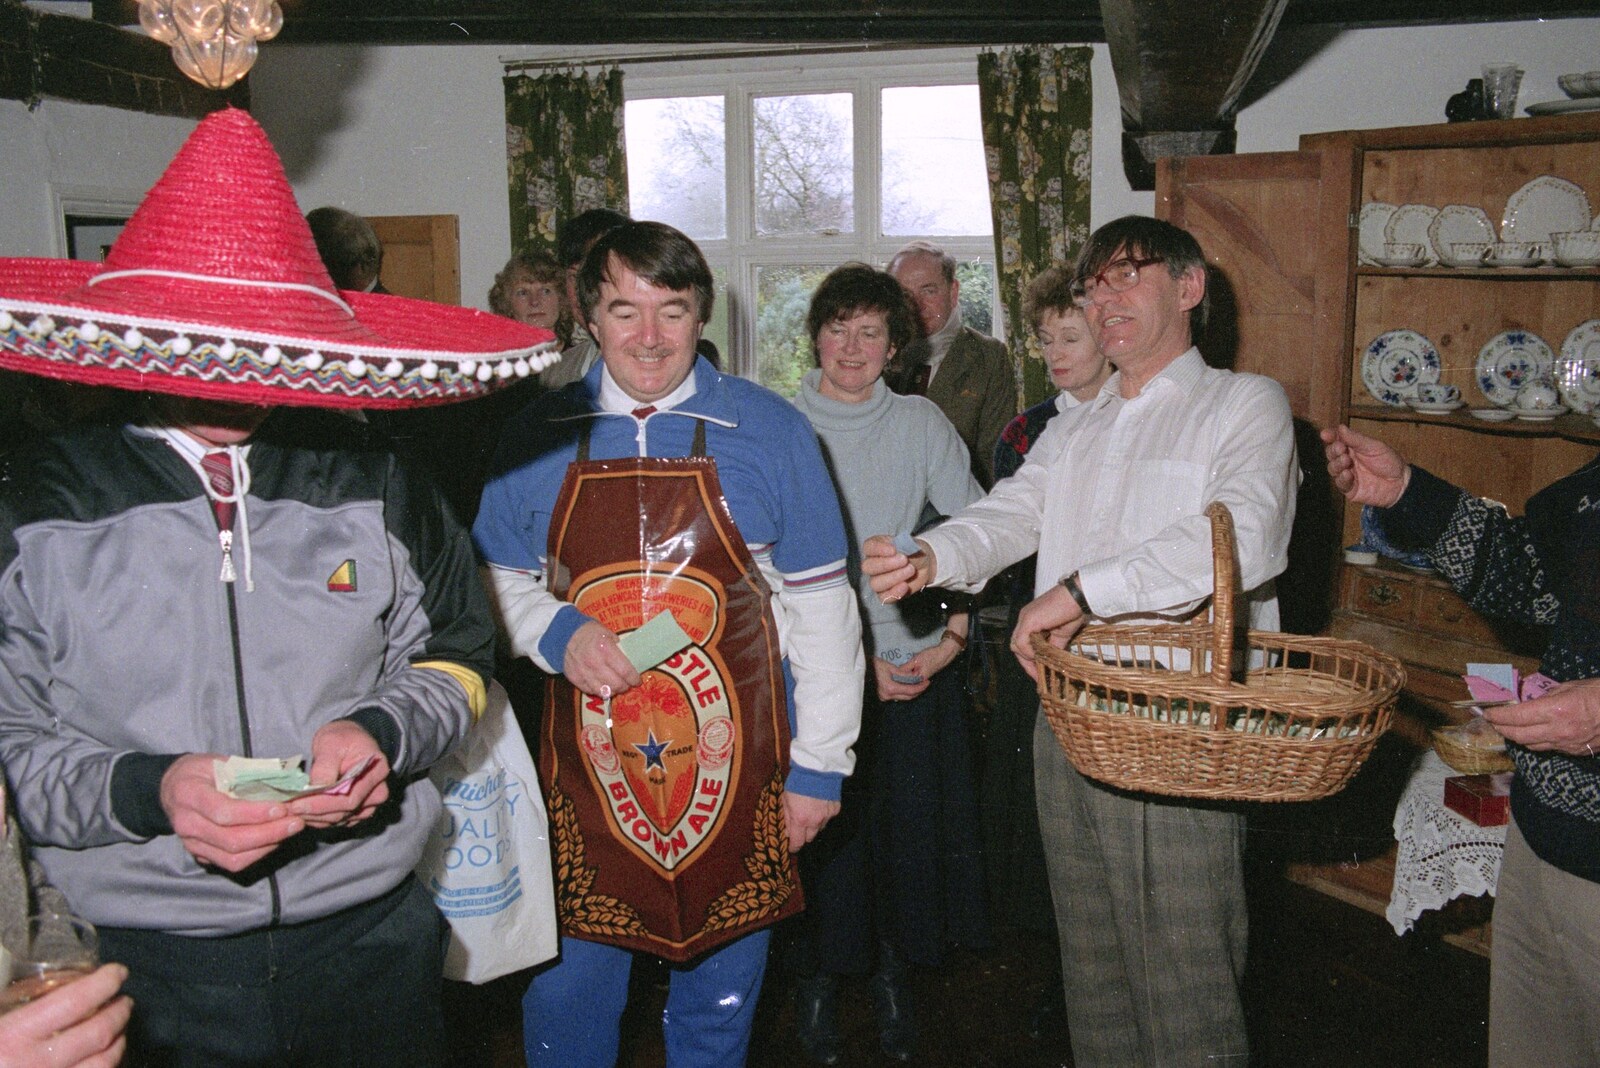 Derek reads out the winning ticket from Pancake Day in Starston, Norfolk - 27th February 1990